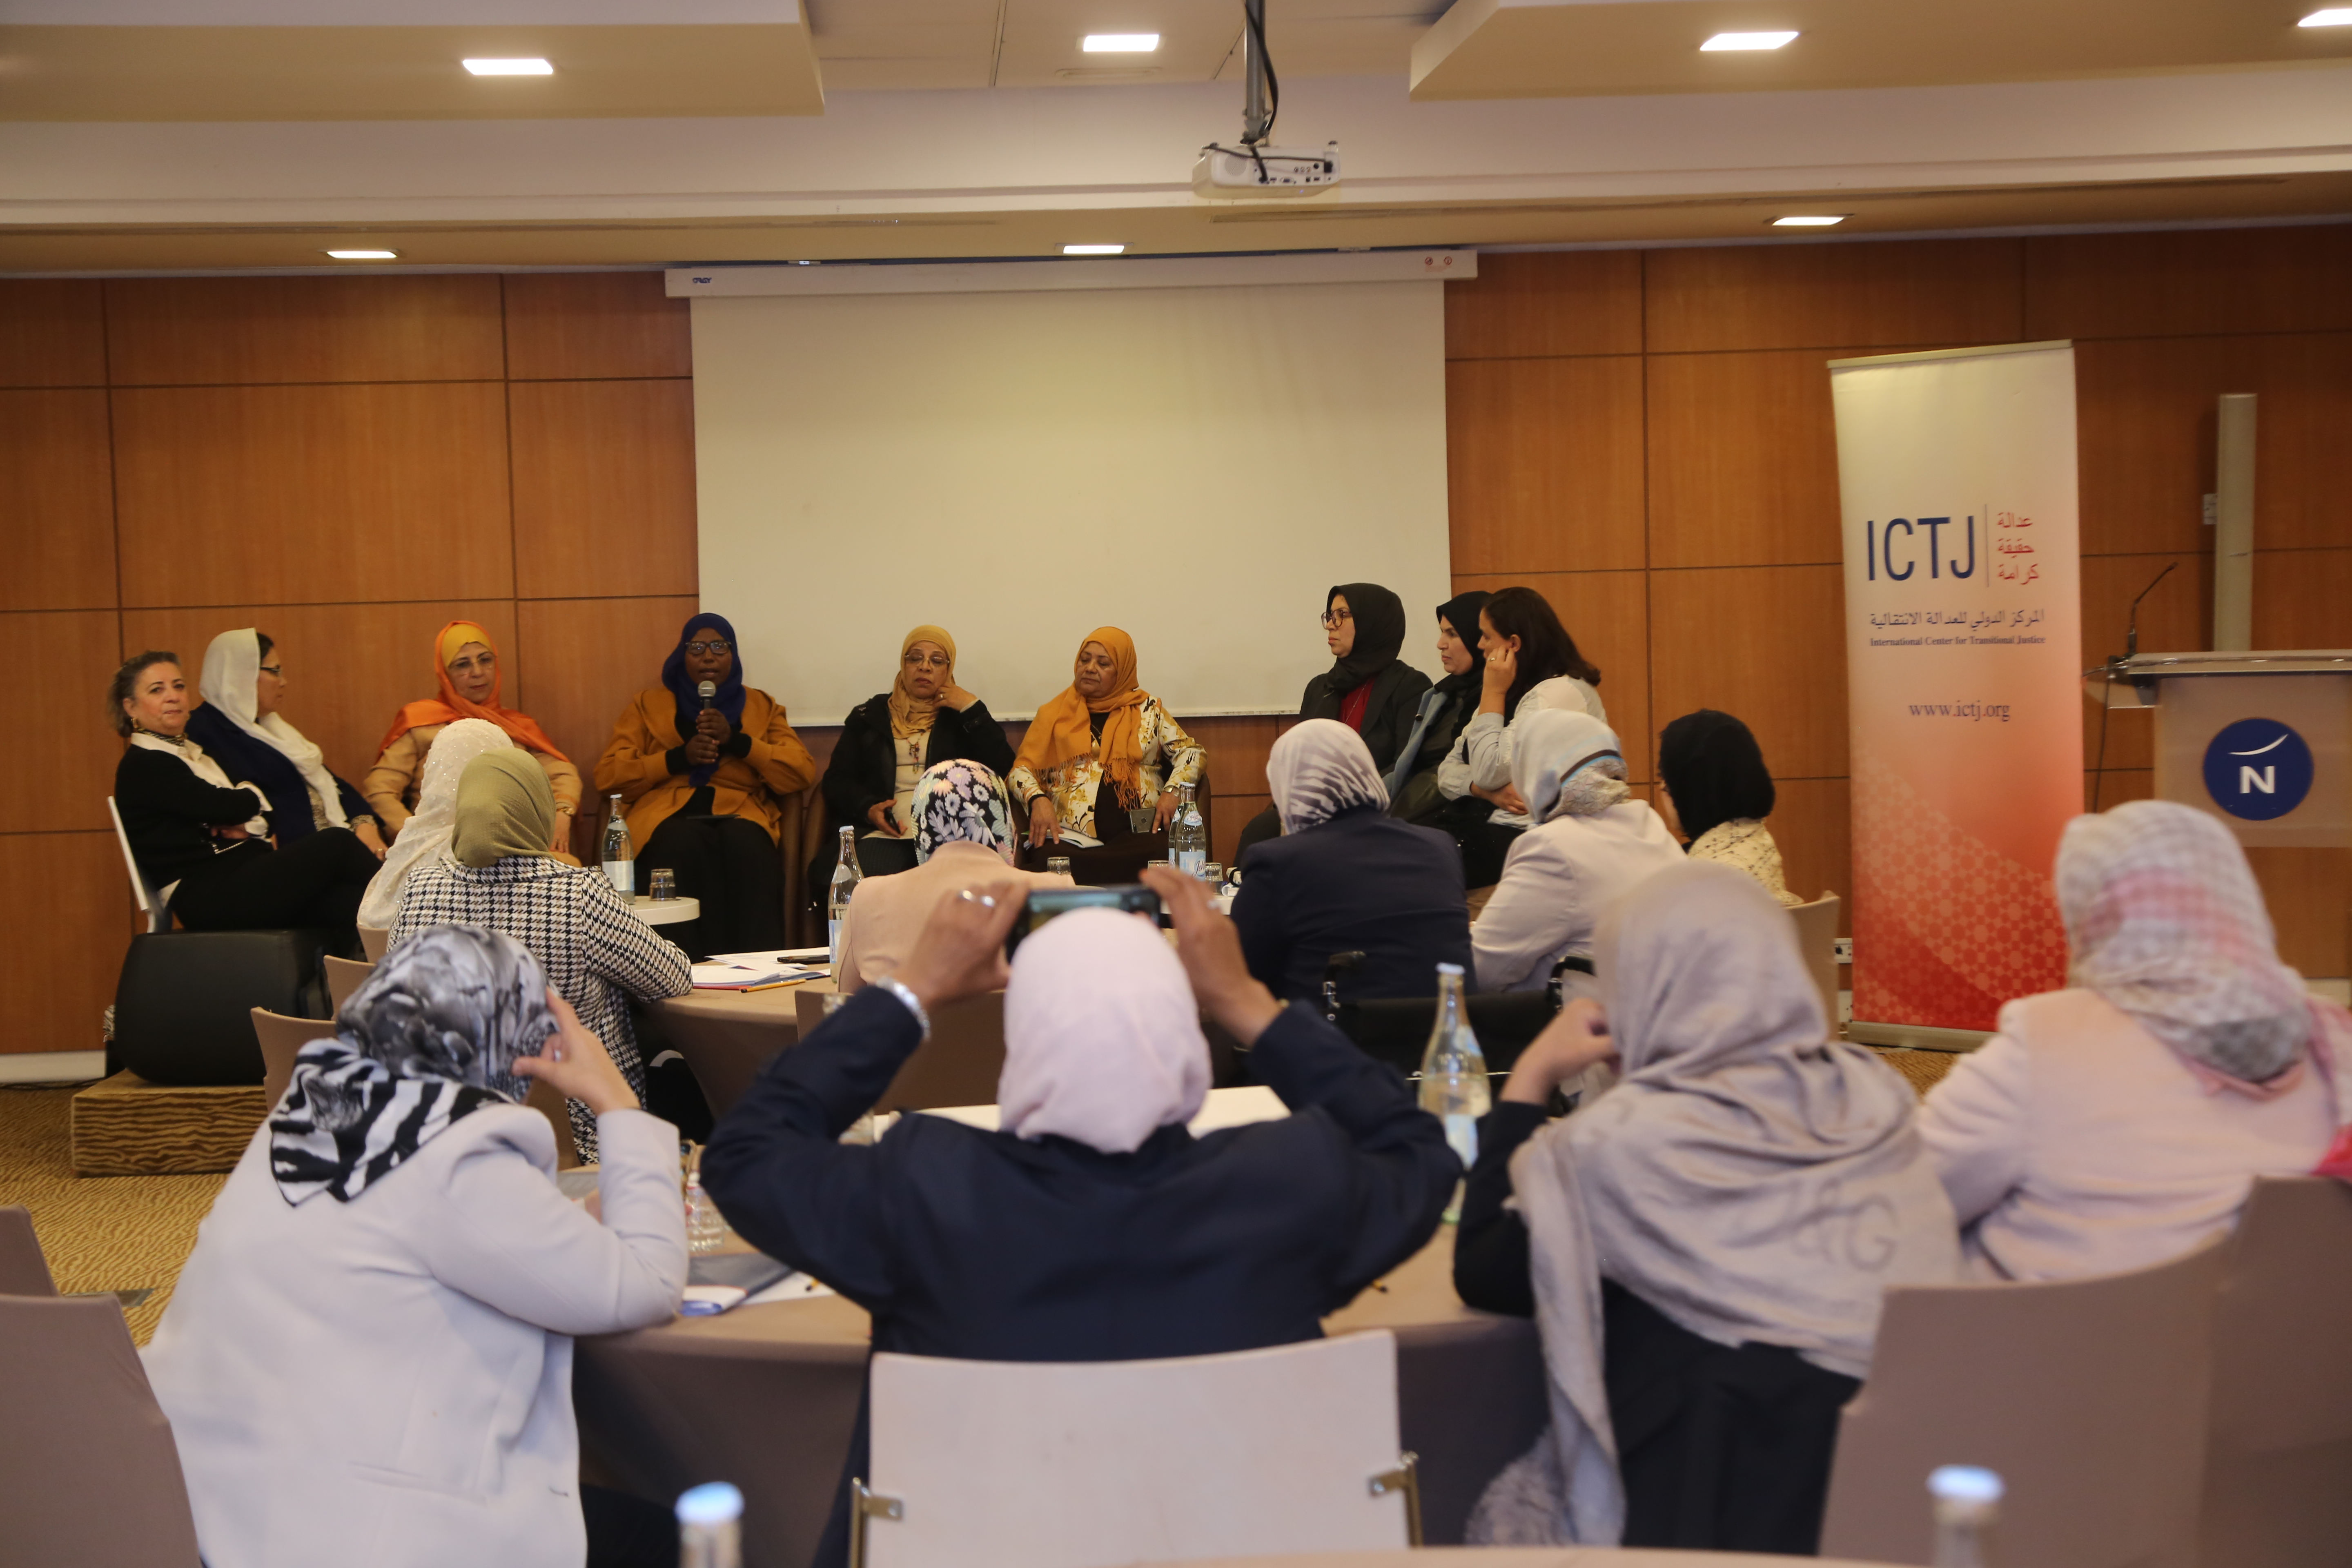 Tunisian activists and members of the "Transitional Justice Is also for Women” Network present on how they formed their alliance and the challenges they faced at the February 2023 workshop in Tunis.